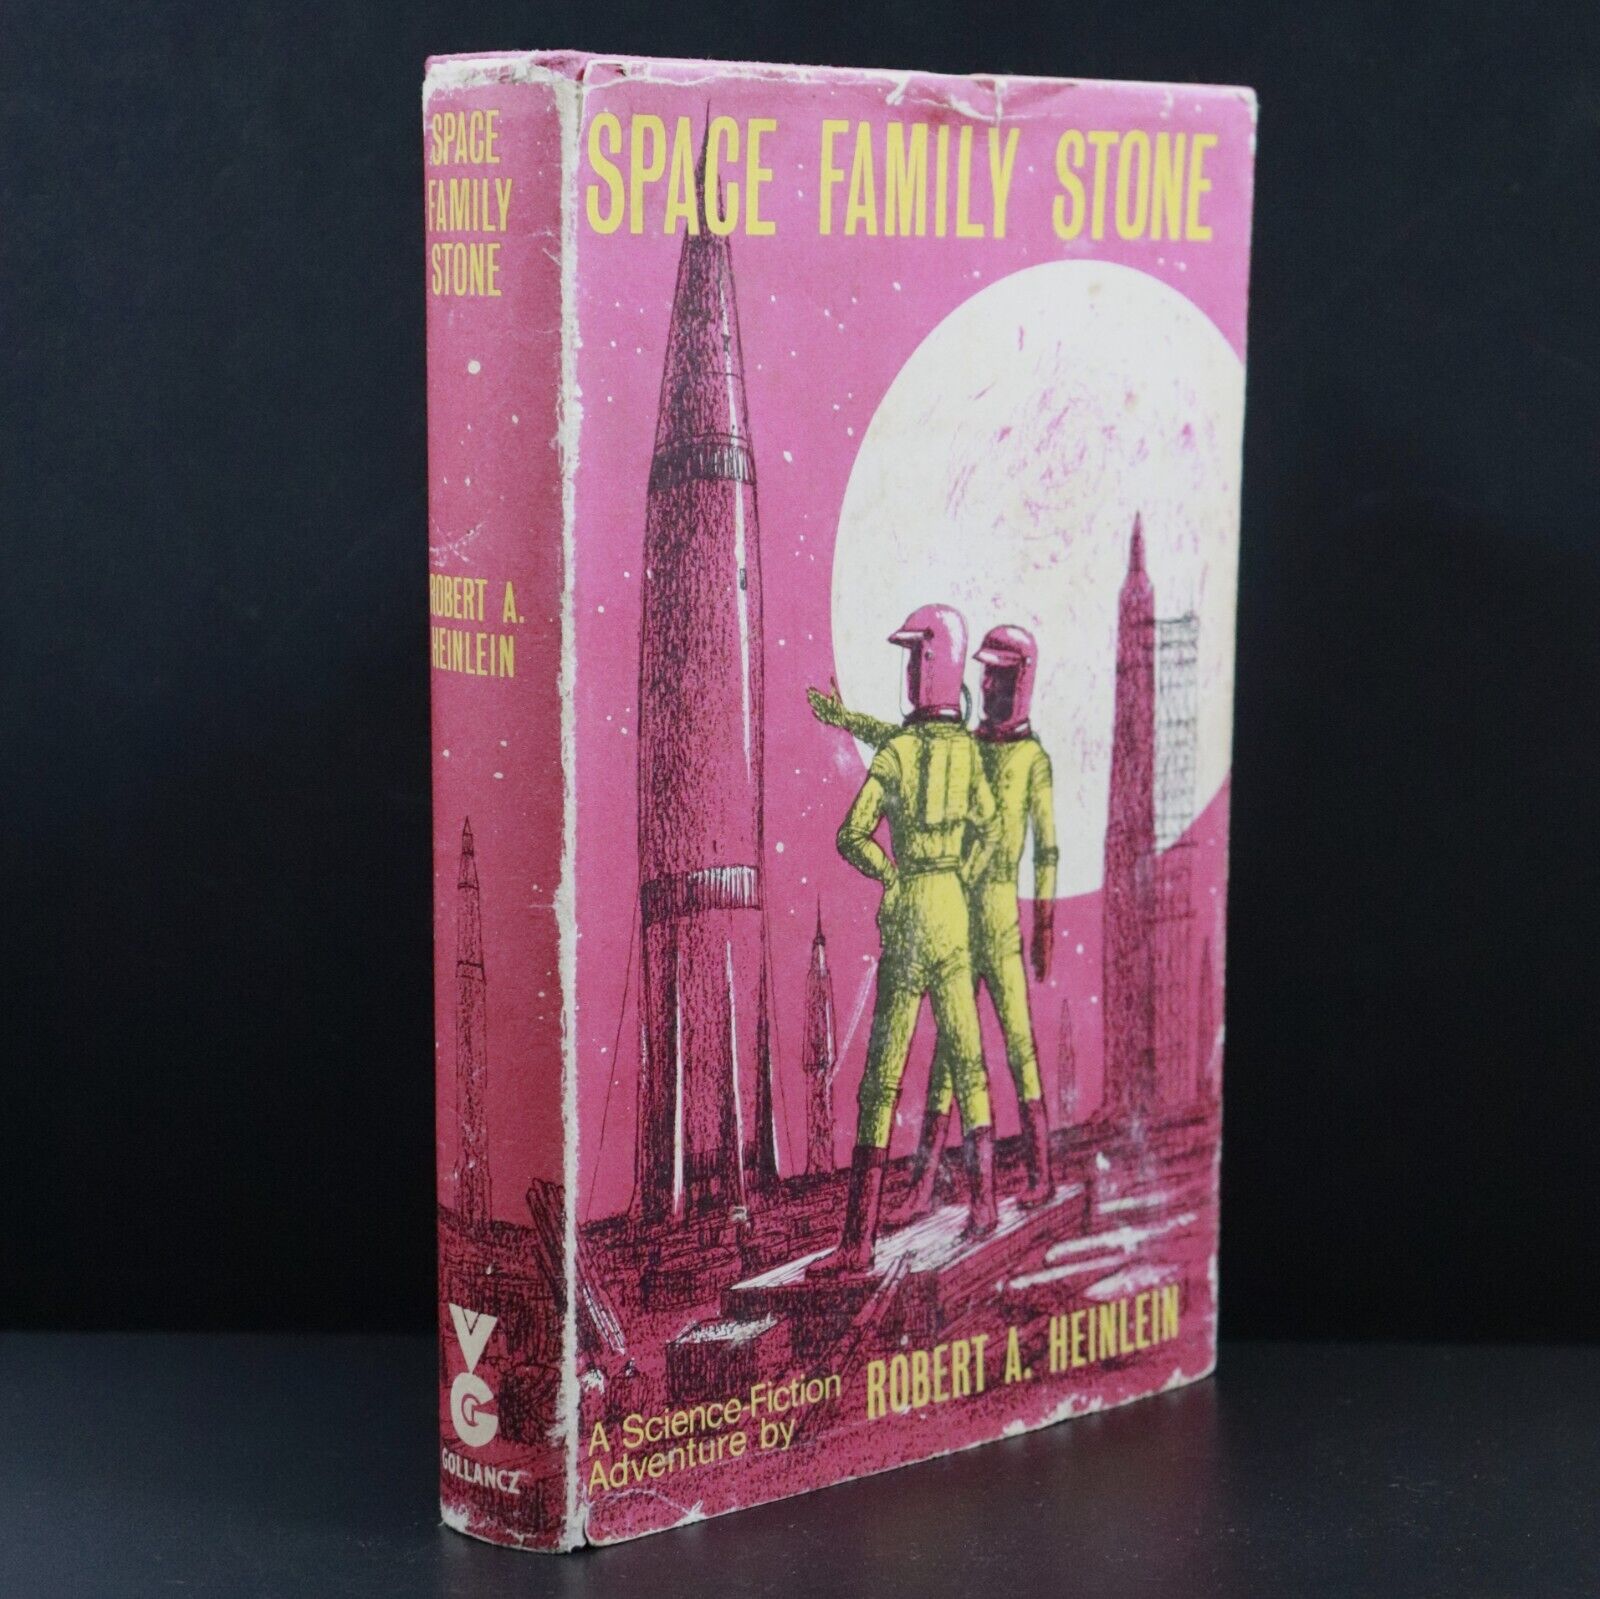 1969 Space Family Stone by RA Heinlein Vintage Science Fiction Book 1st UK Ed